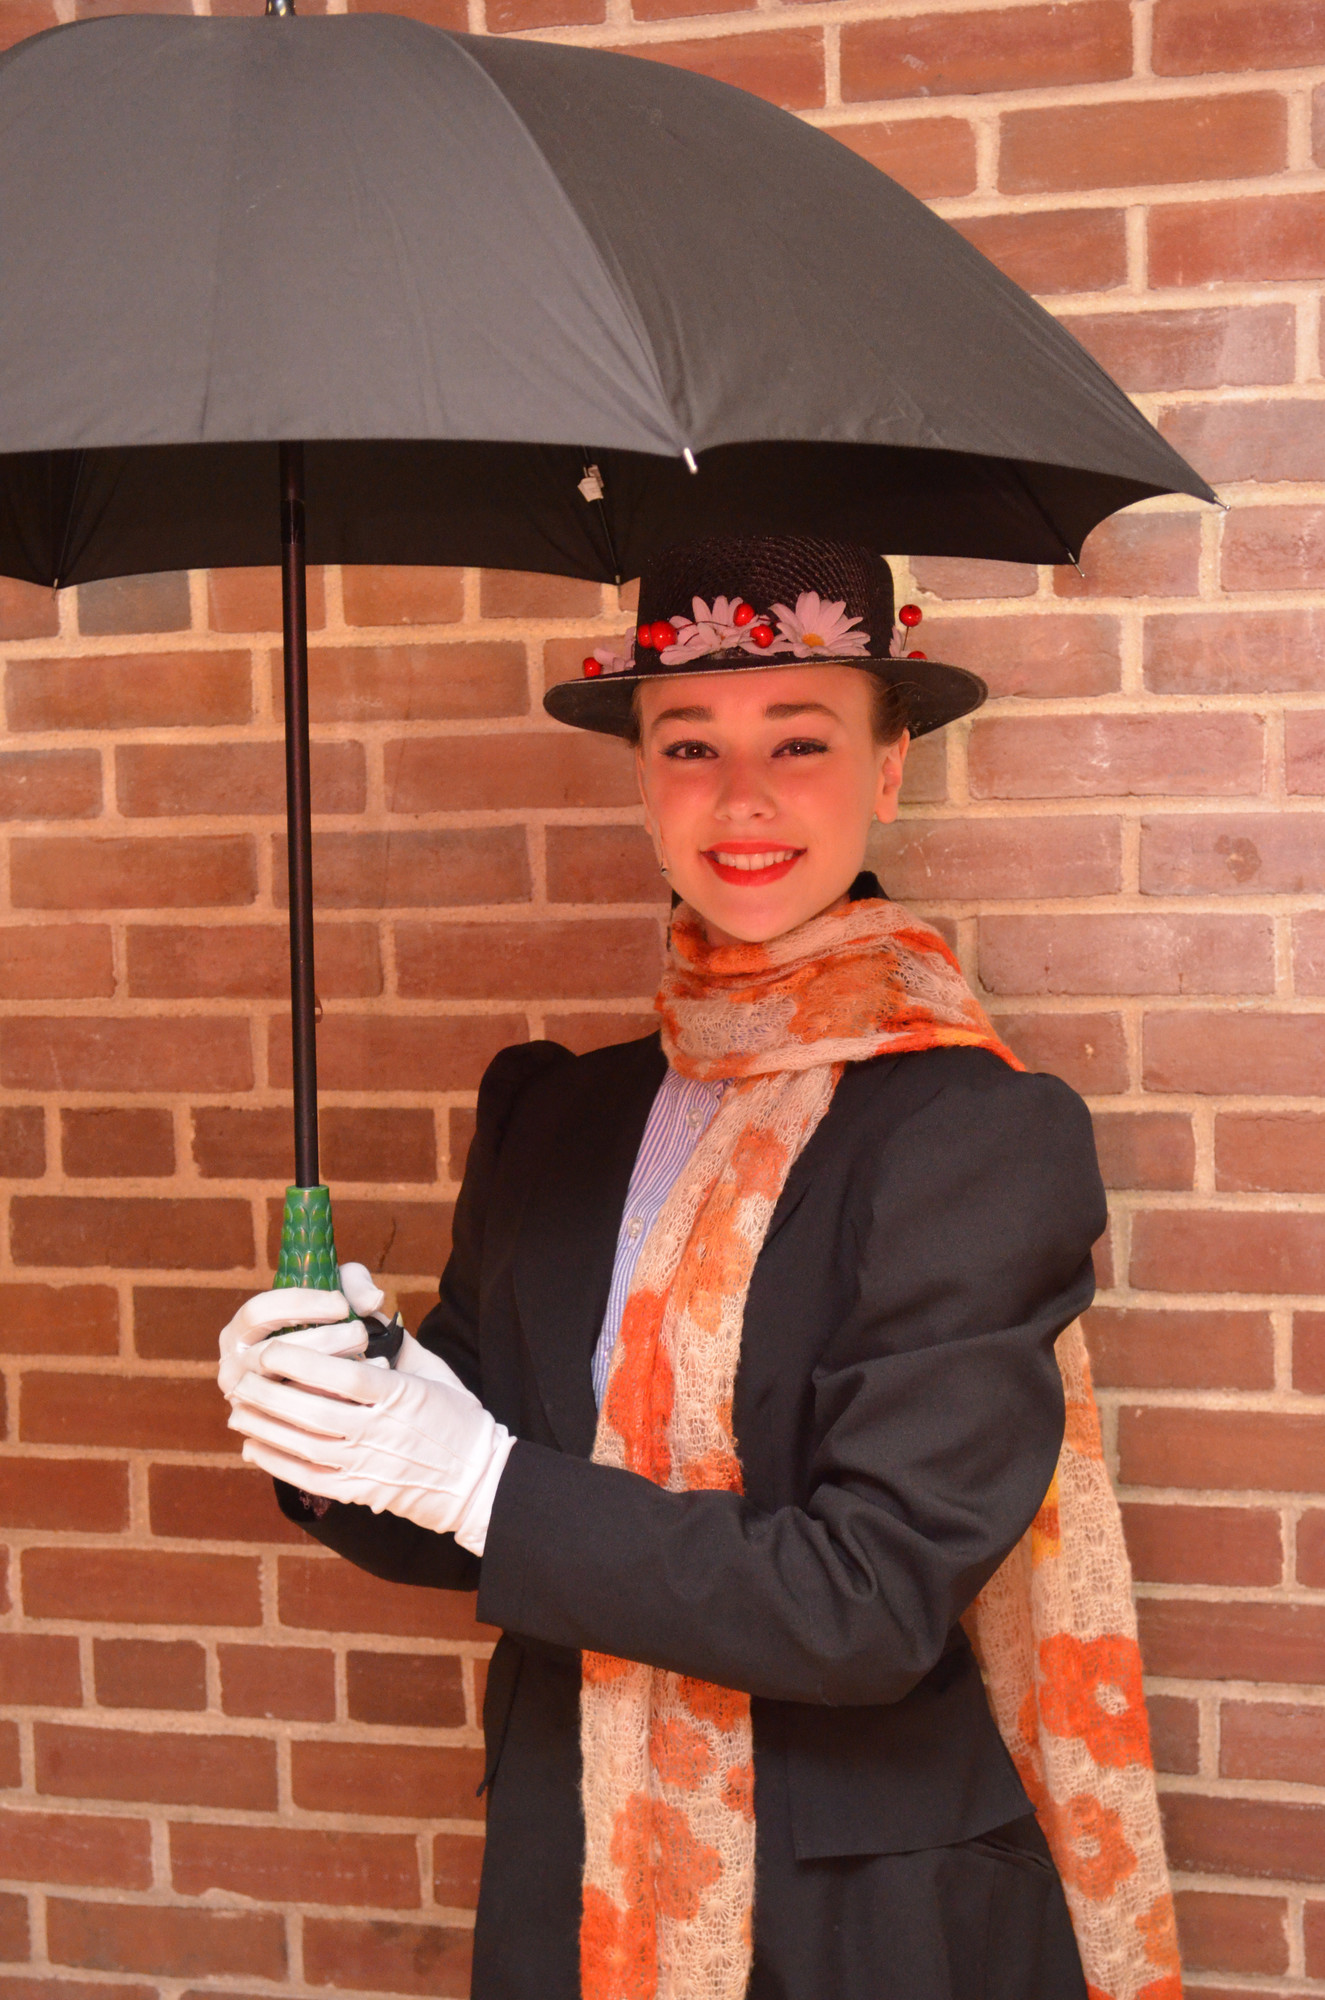 Mary Poppins played by Katharine Calabrese